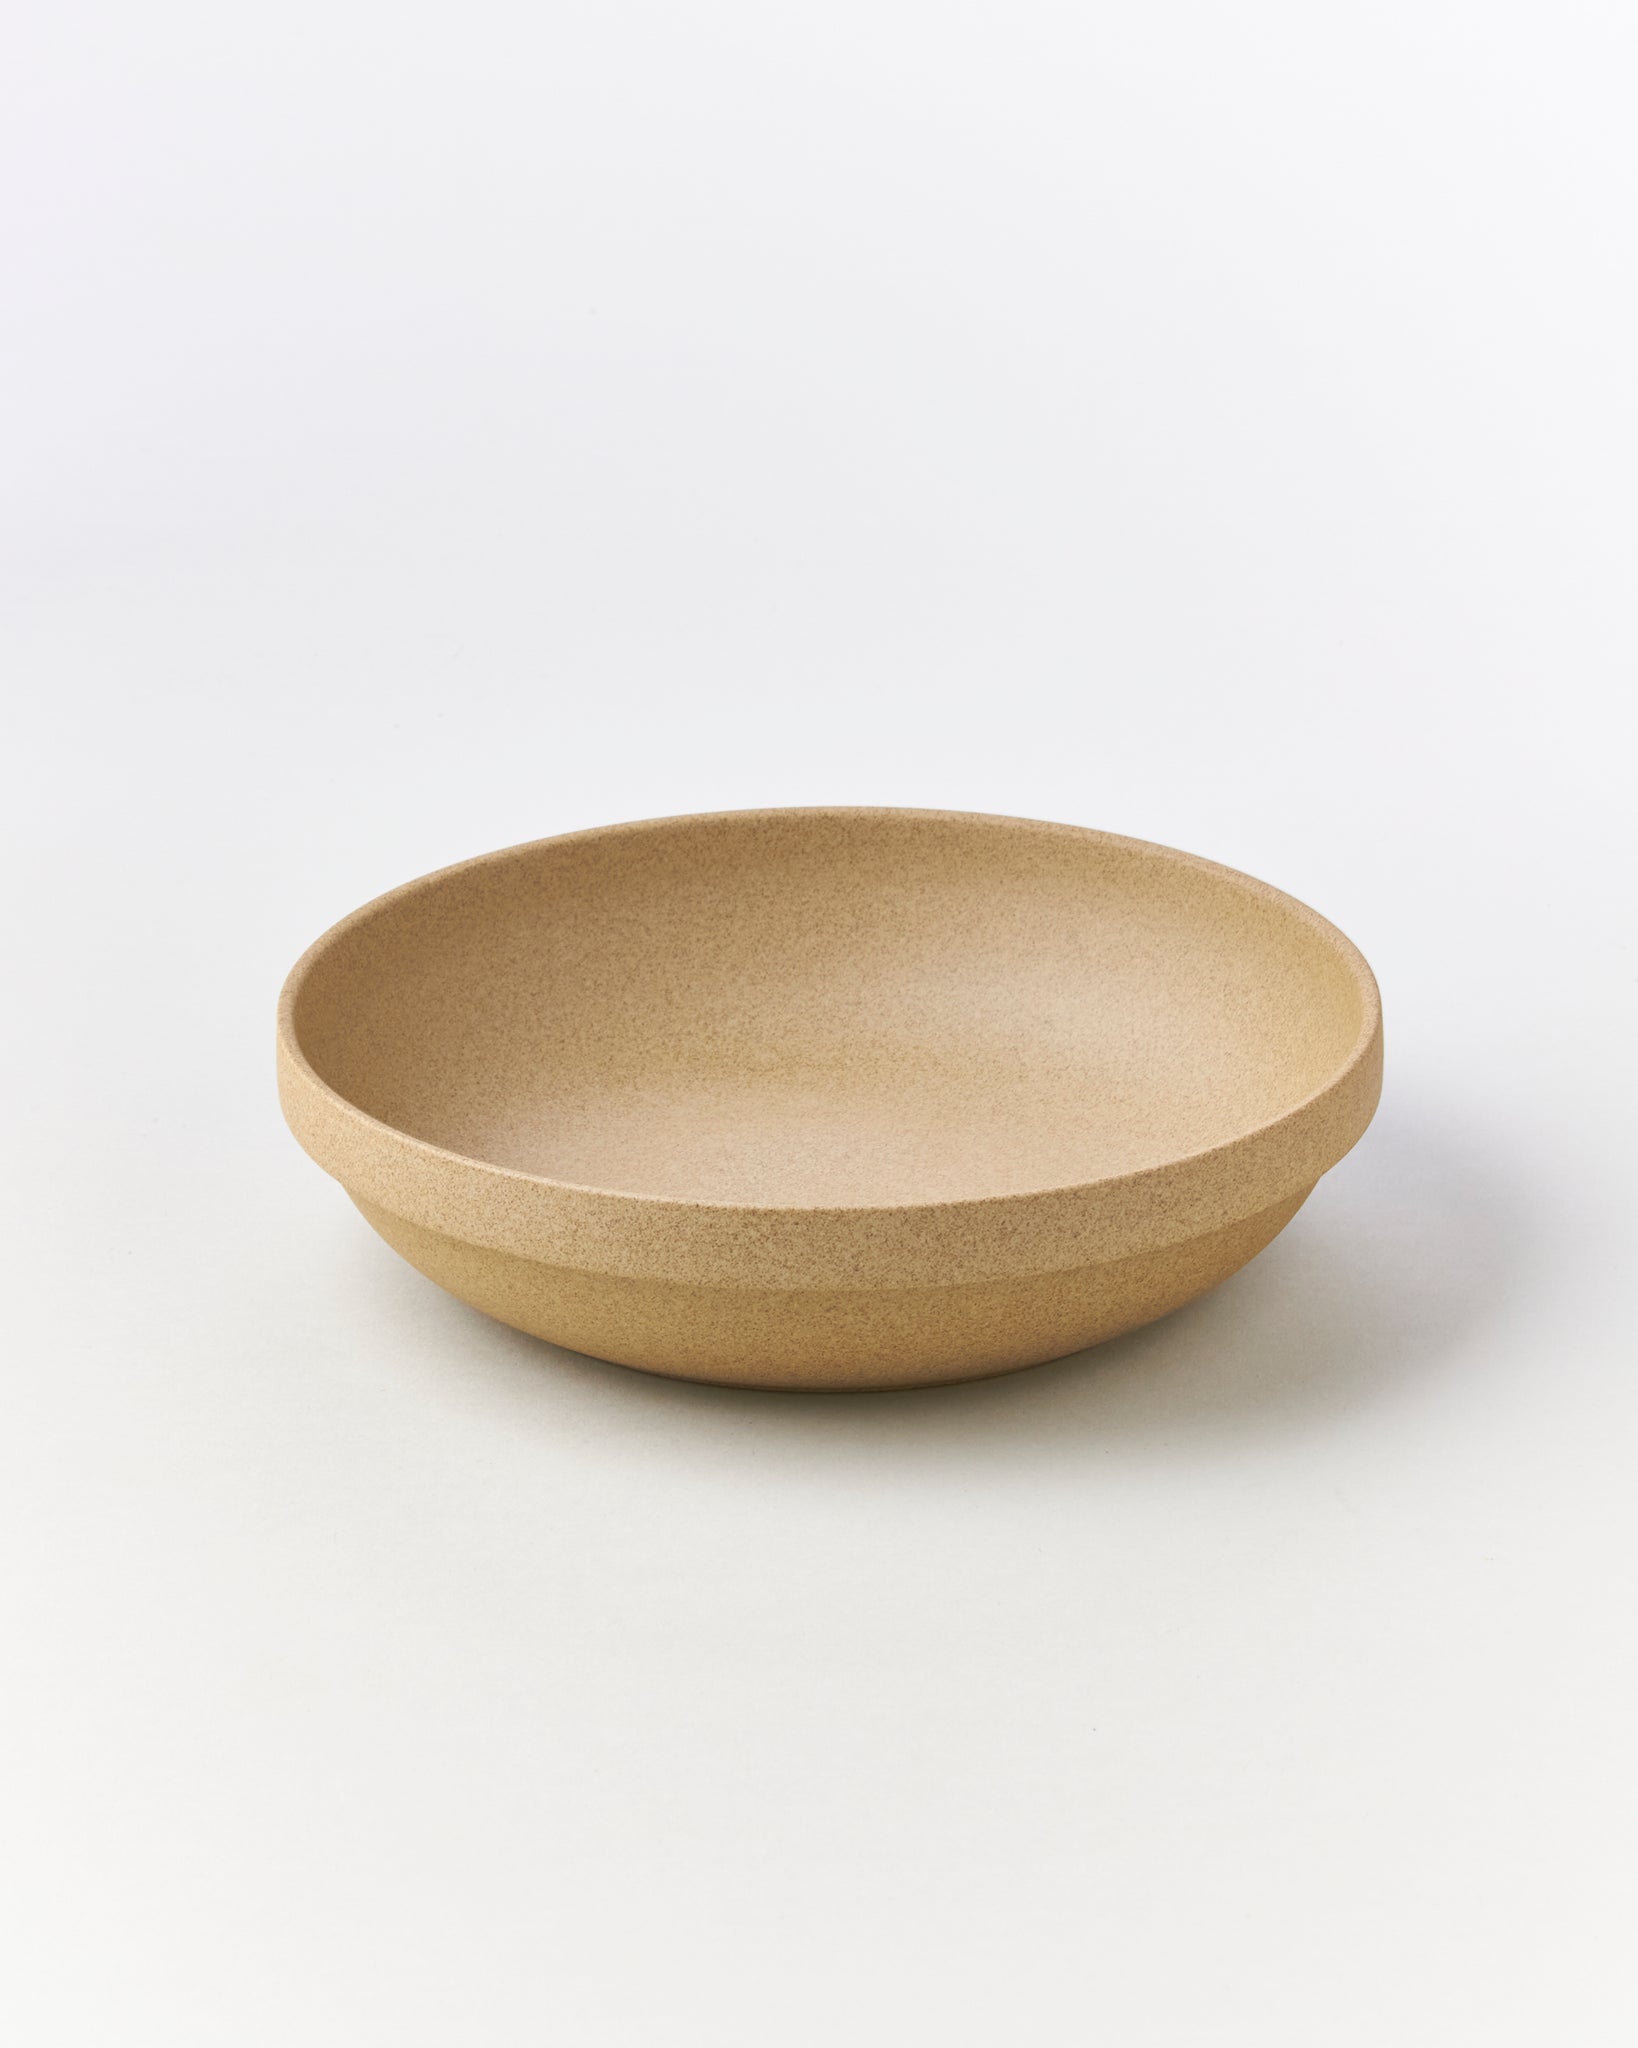 Hasami 8 5/8-inch Round Bowl in Natural